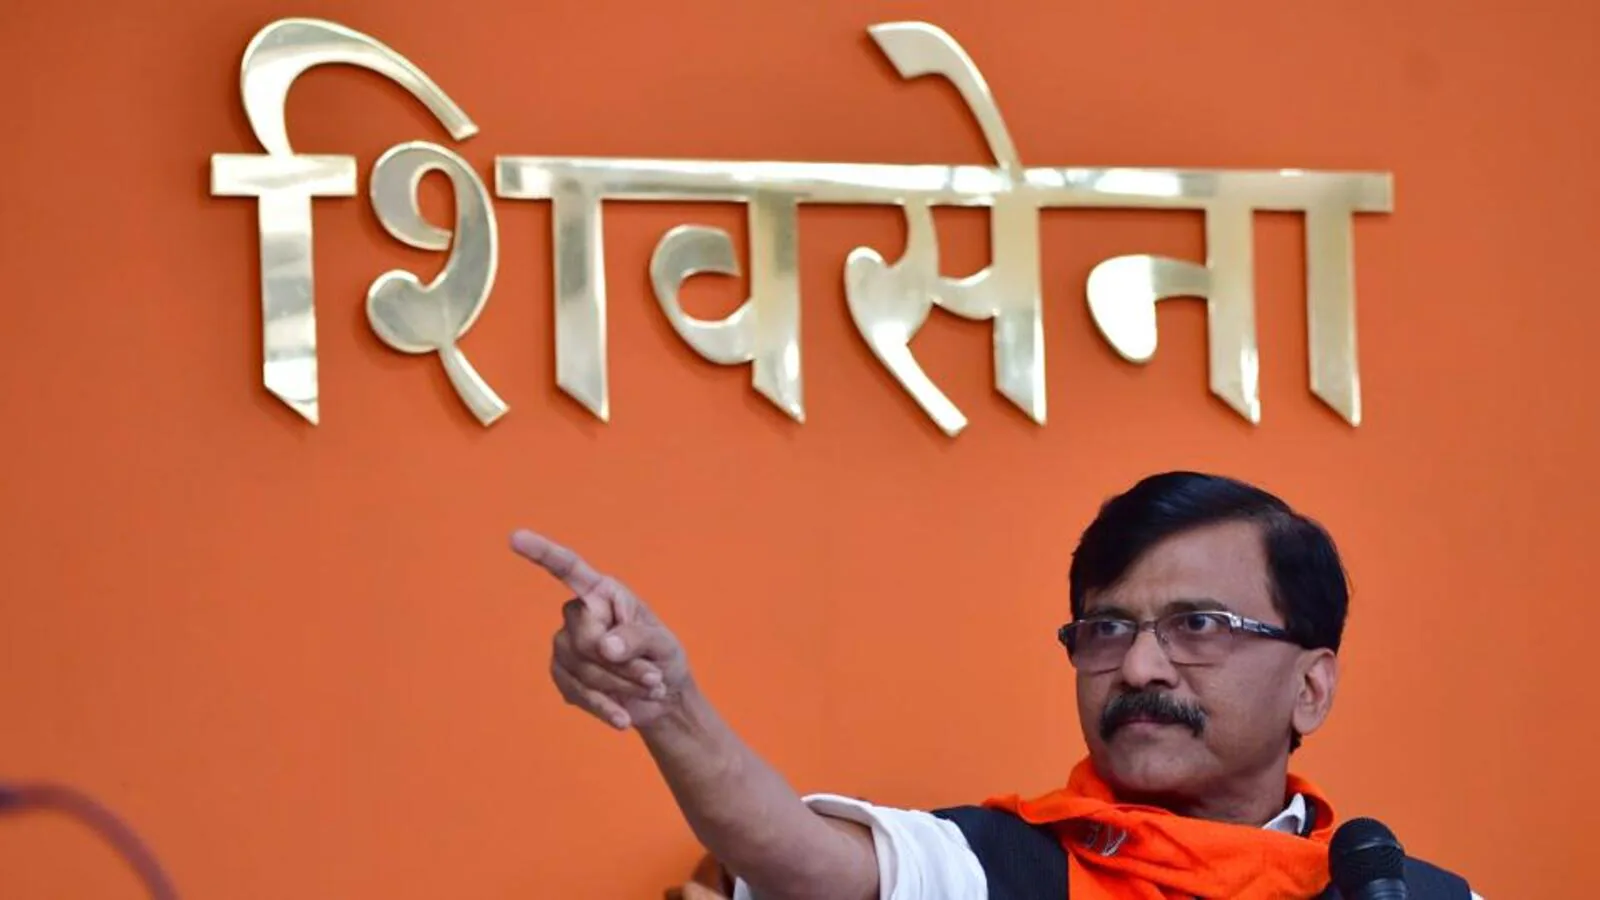 Sena draws parallels between situation in Delhi and Mumbai, accuses BJP of fomenting communal trouble for political gains